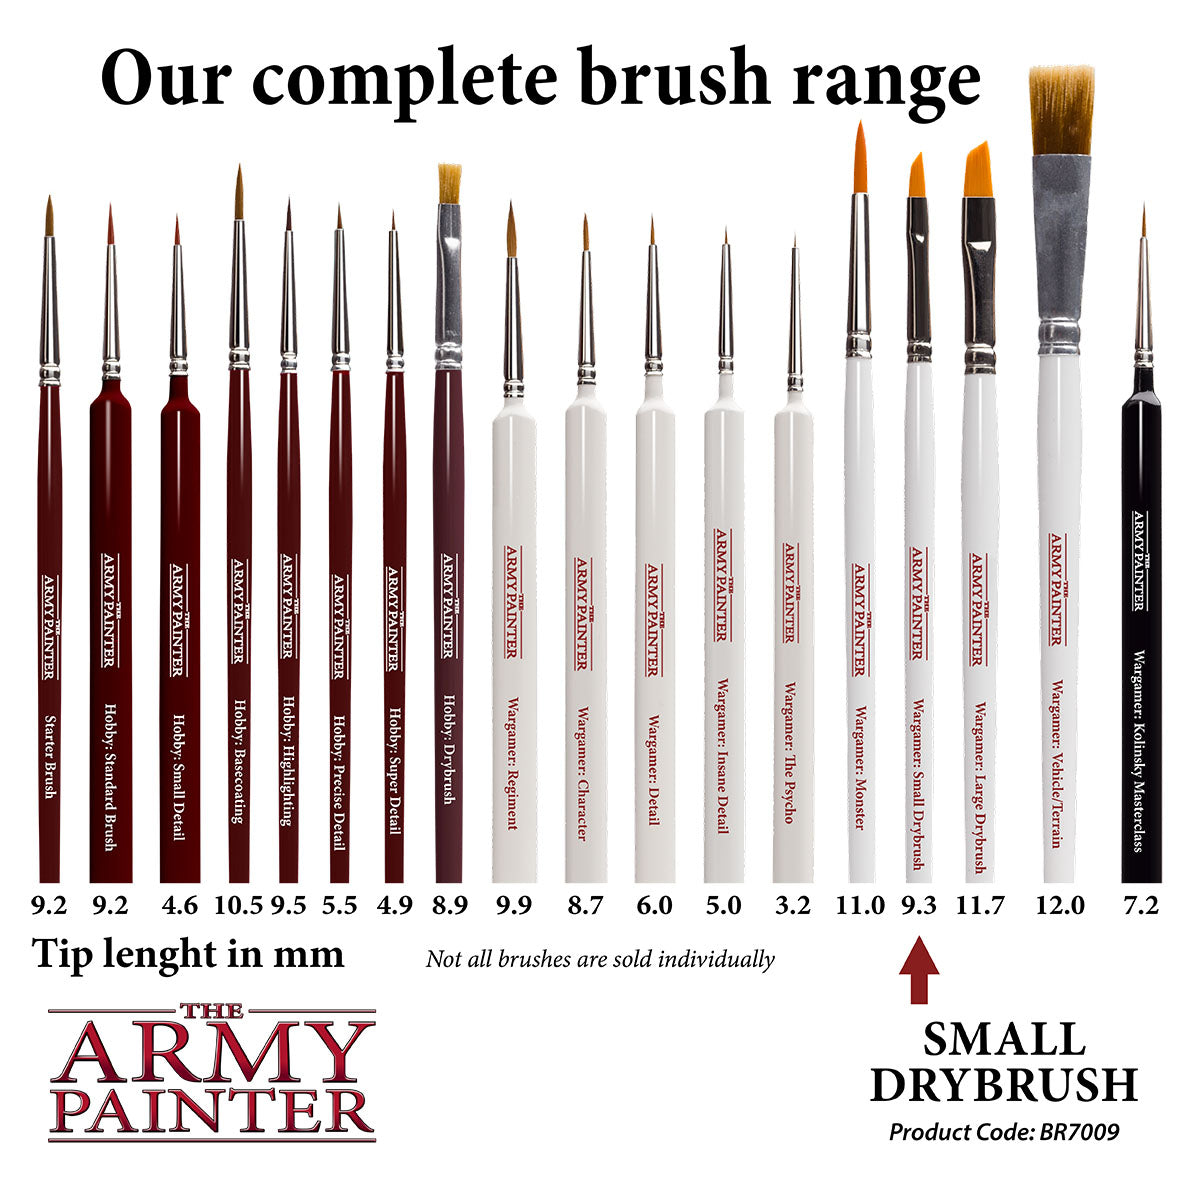 The Army Painter Wargamer: Small Drybrush - Hobby Miniature Model Paint  Brush with Synthetic Toray Hair - Model Brushes & Miniature Paint Brushes  for